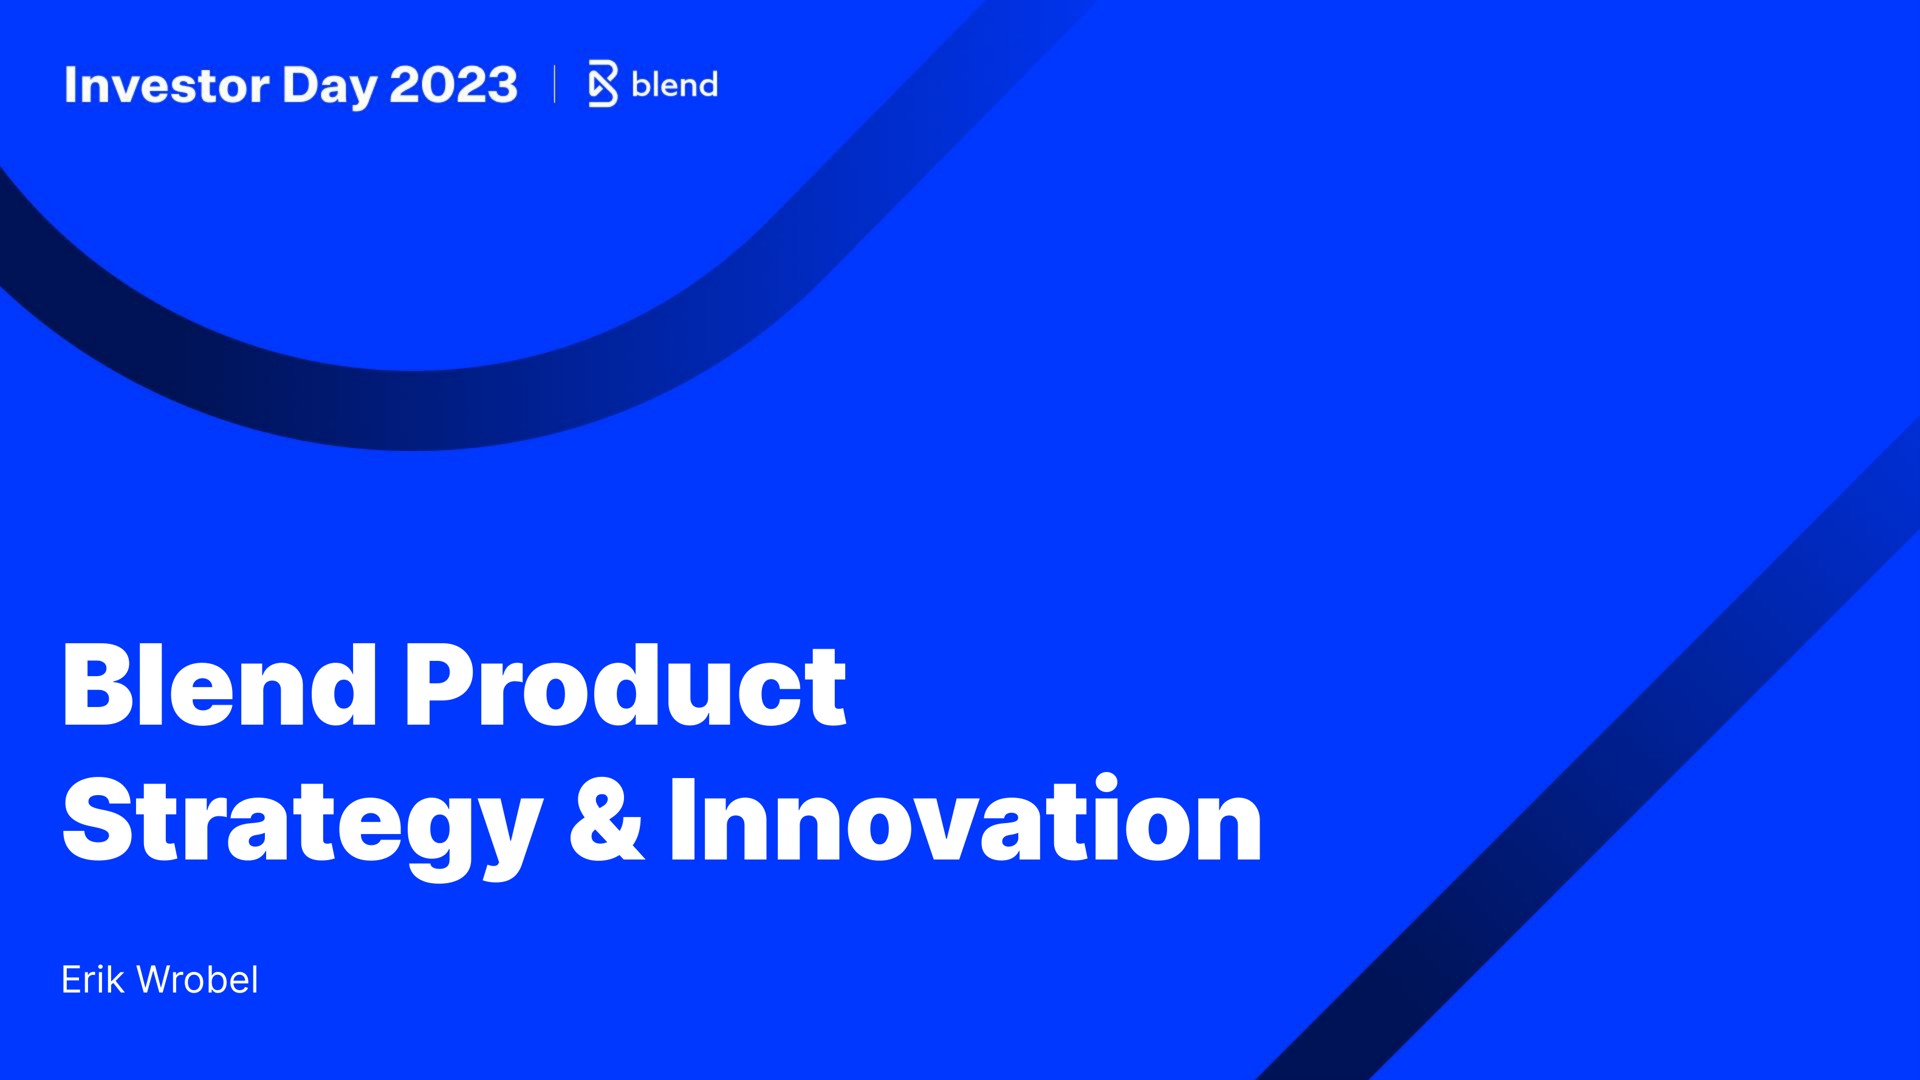 blend product strategy innovation investor day | Blend